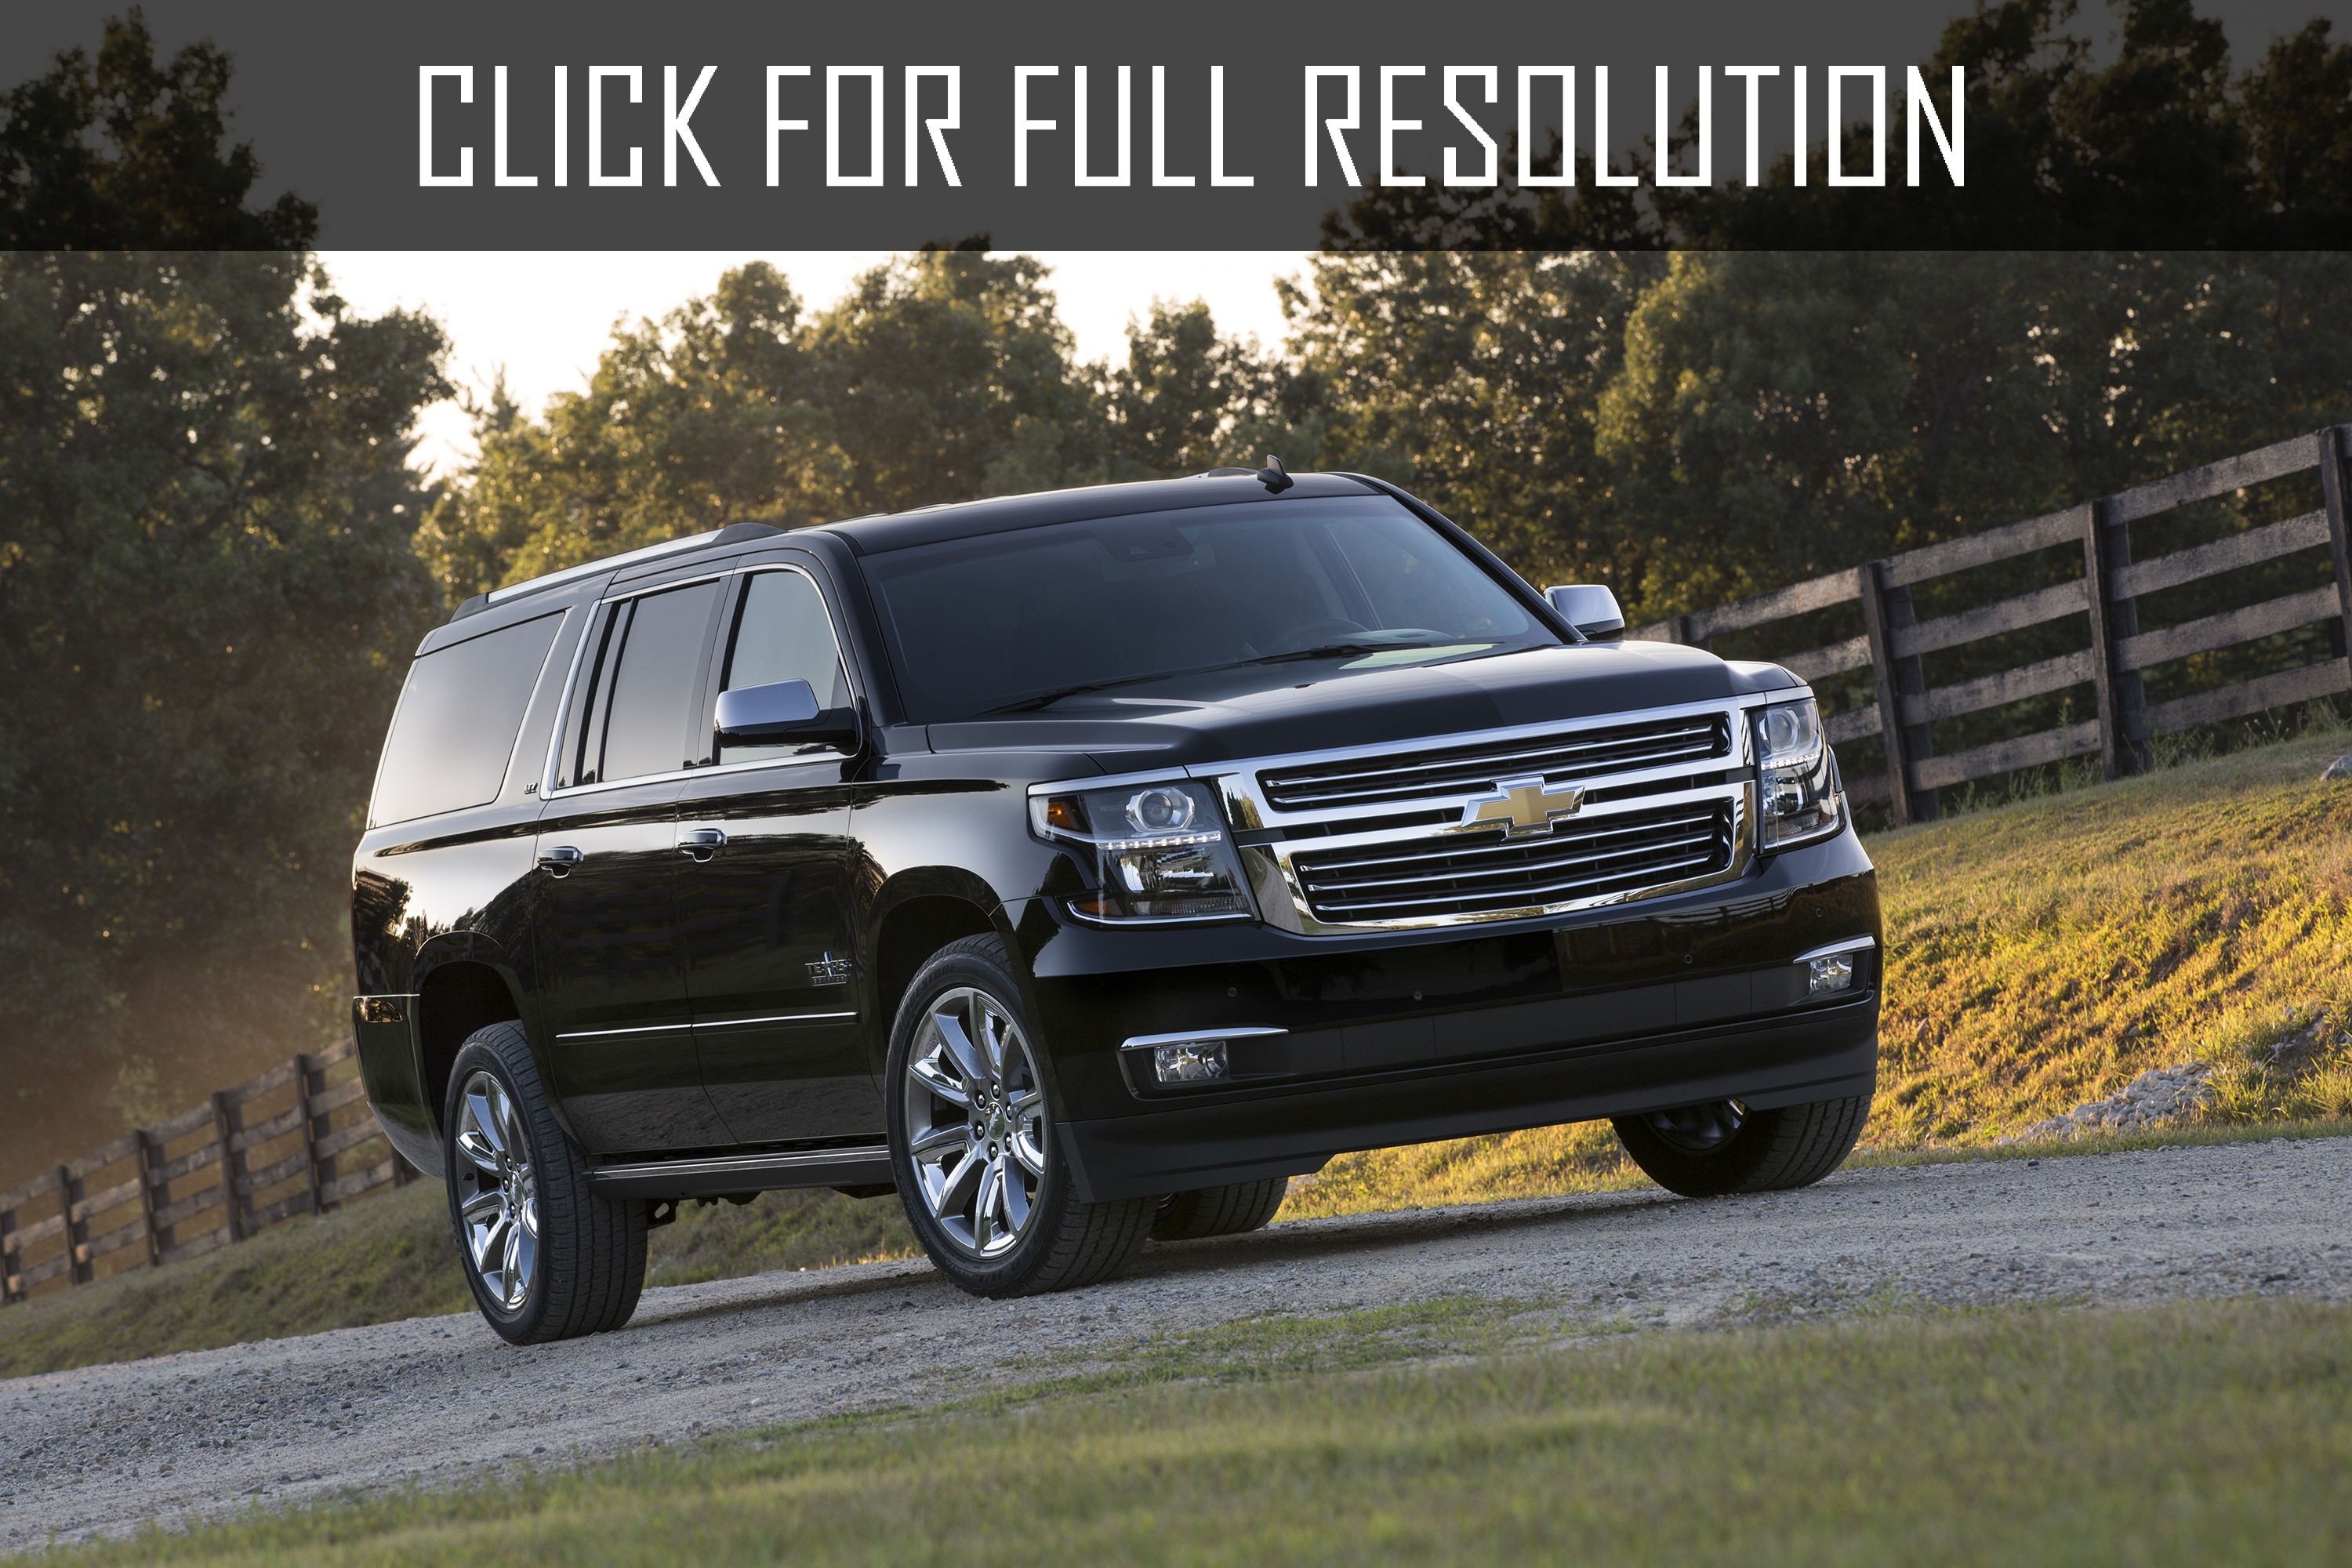 Chevrolet Tahoe Texas Edition amazing photo gallery, some information